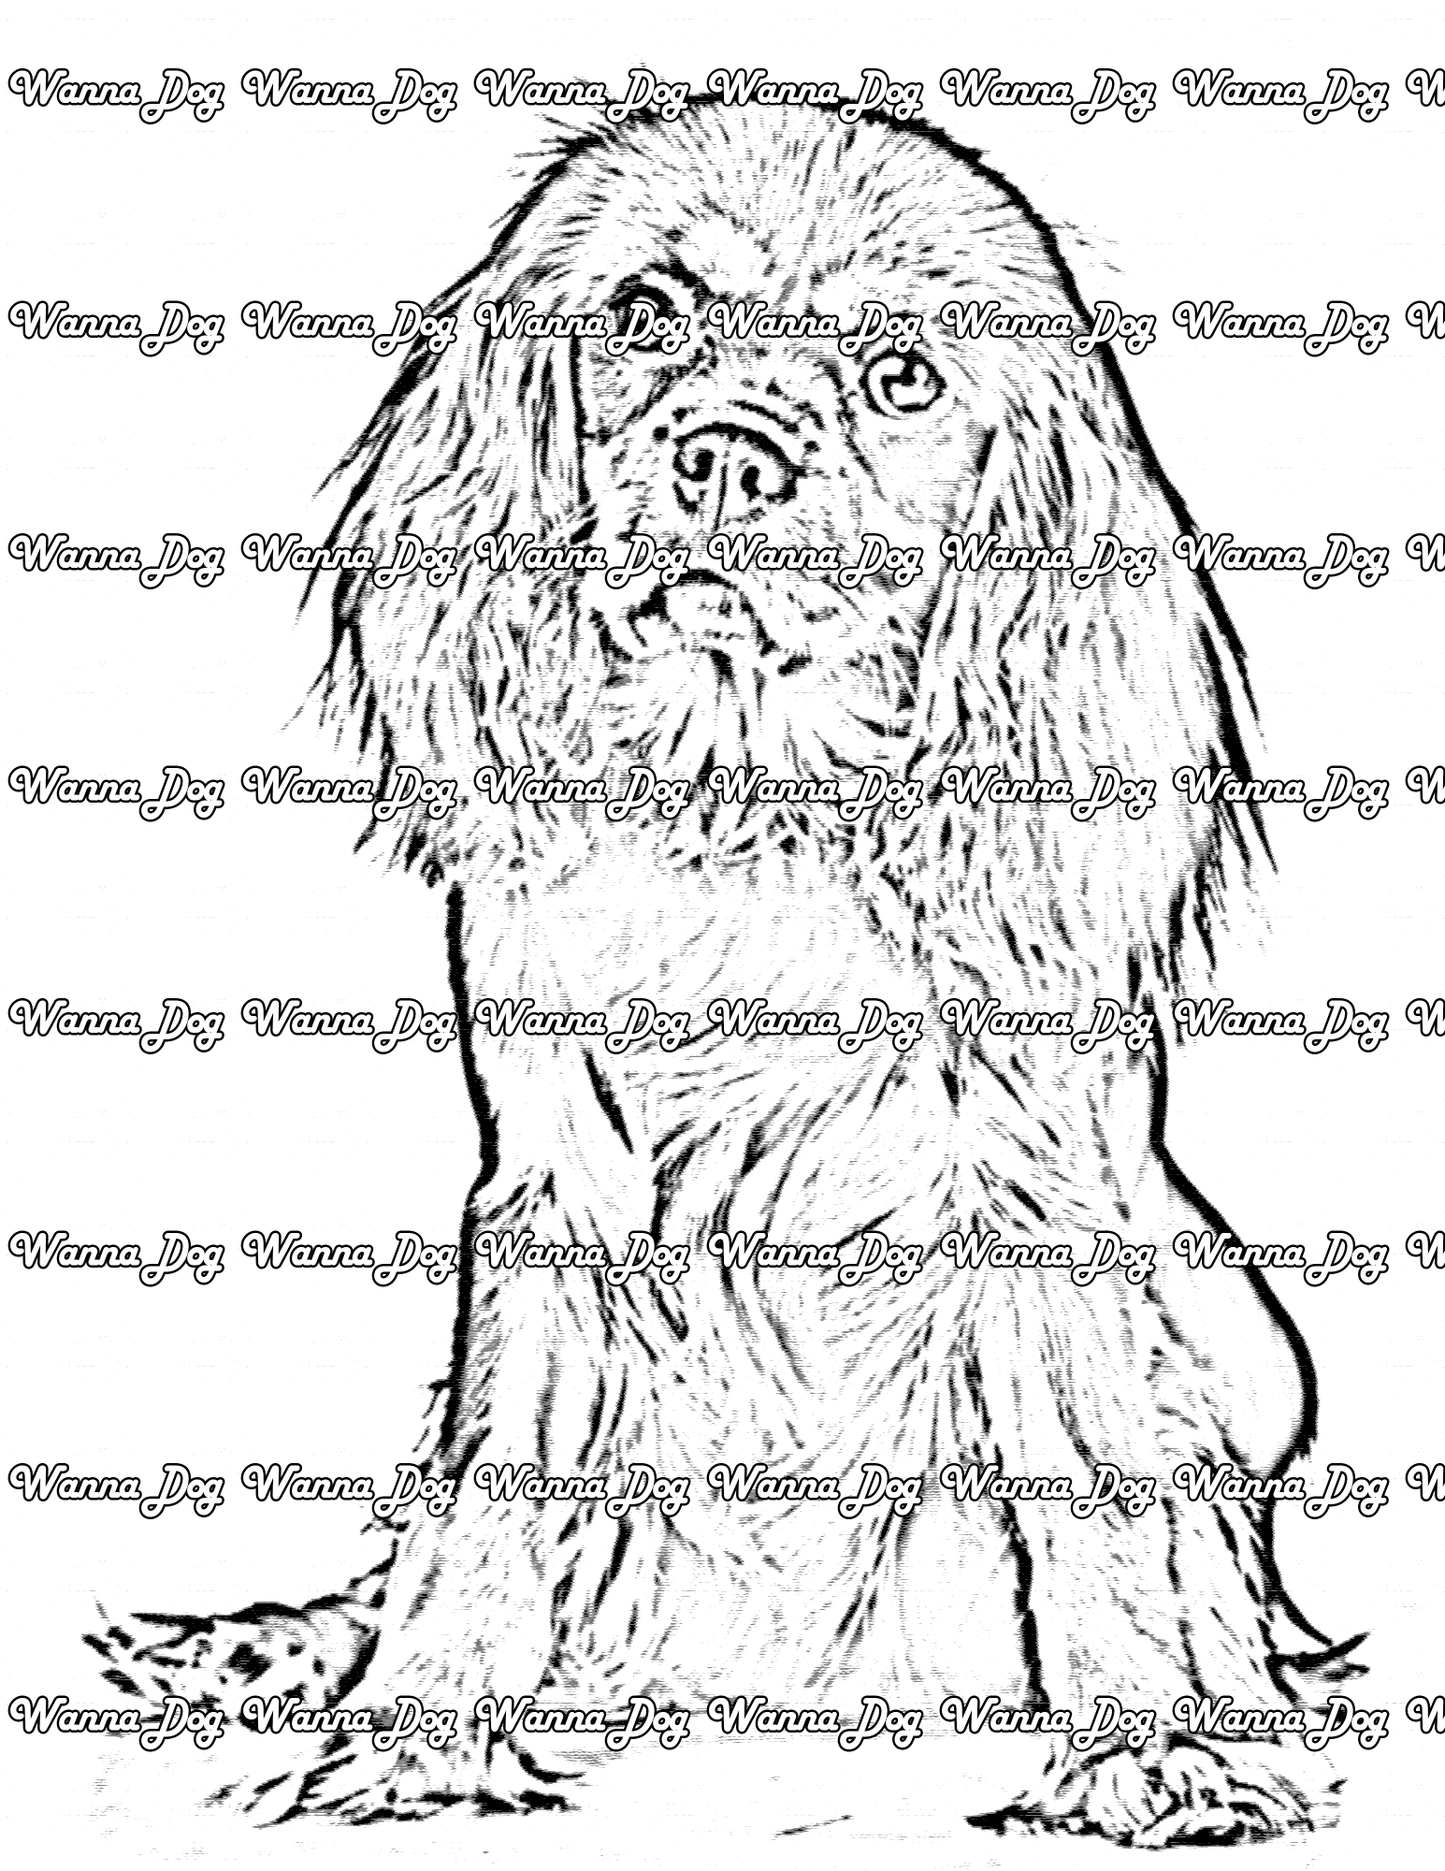 Cavalier King Charles Spaniel Coloring Page of a Cavalier King Charles Spaniel looking into camera